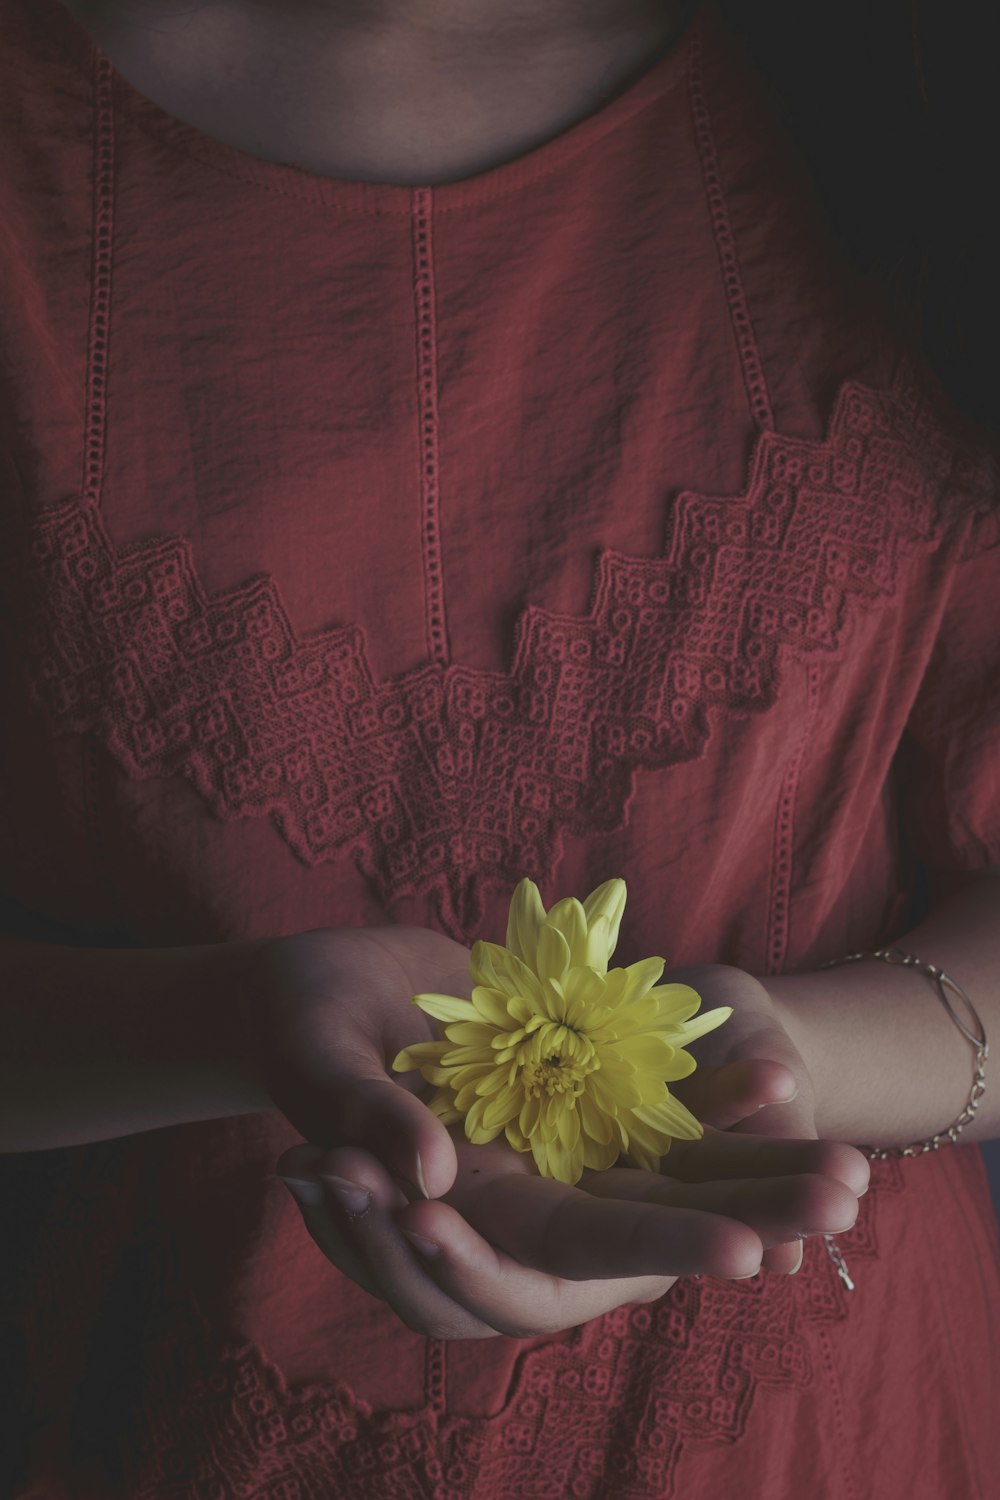 person holding yellow daisy flower